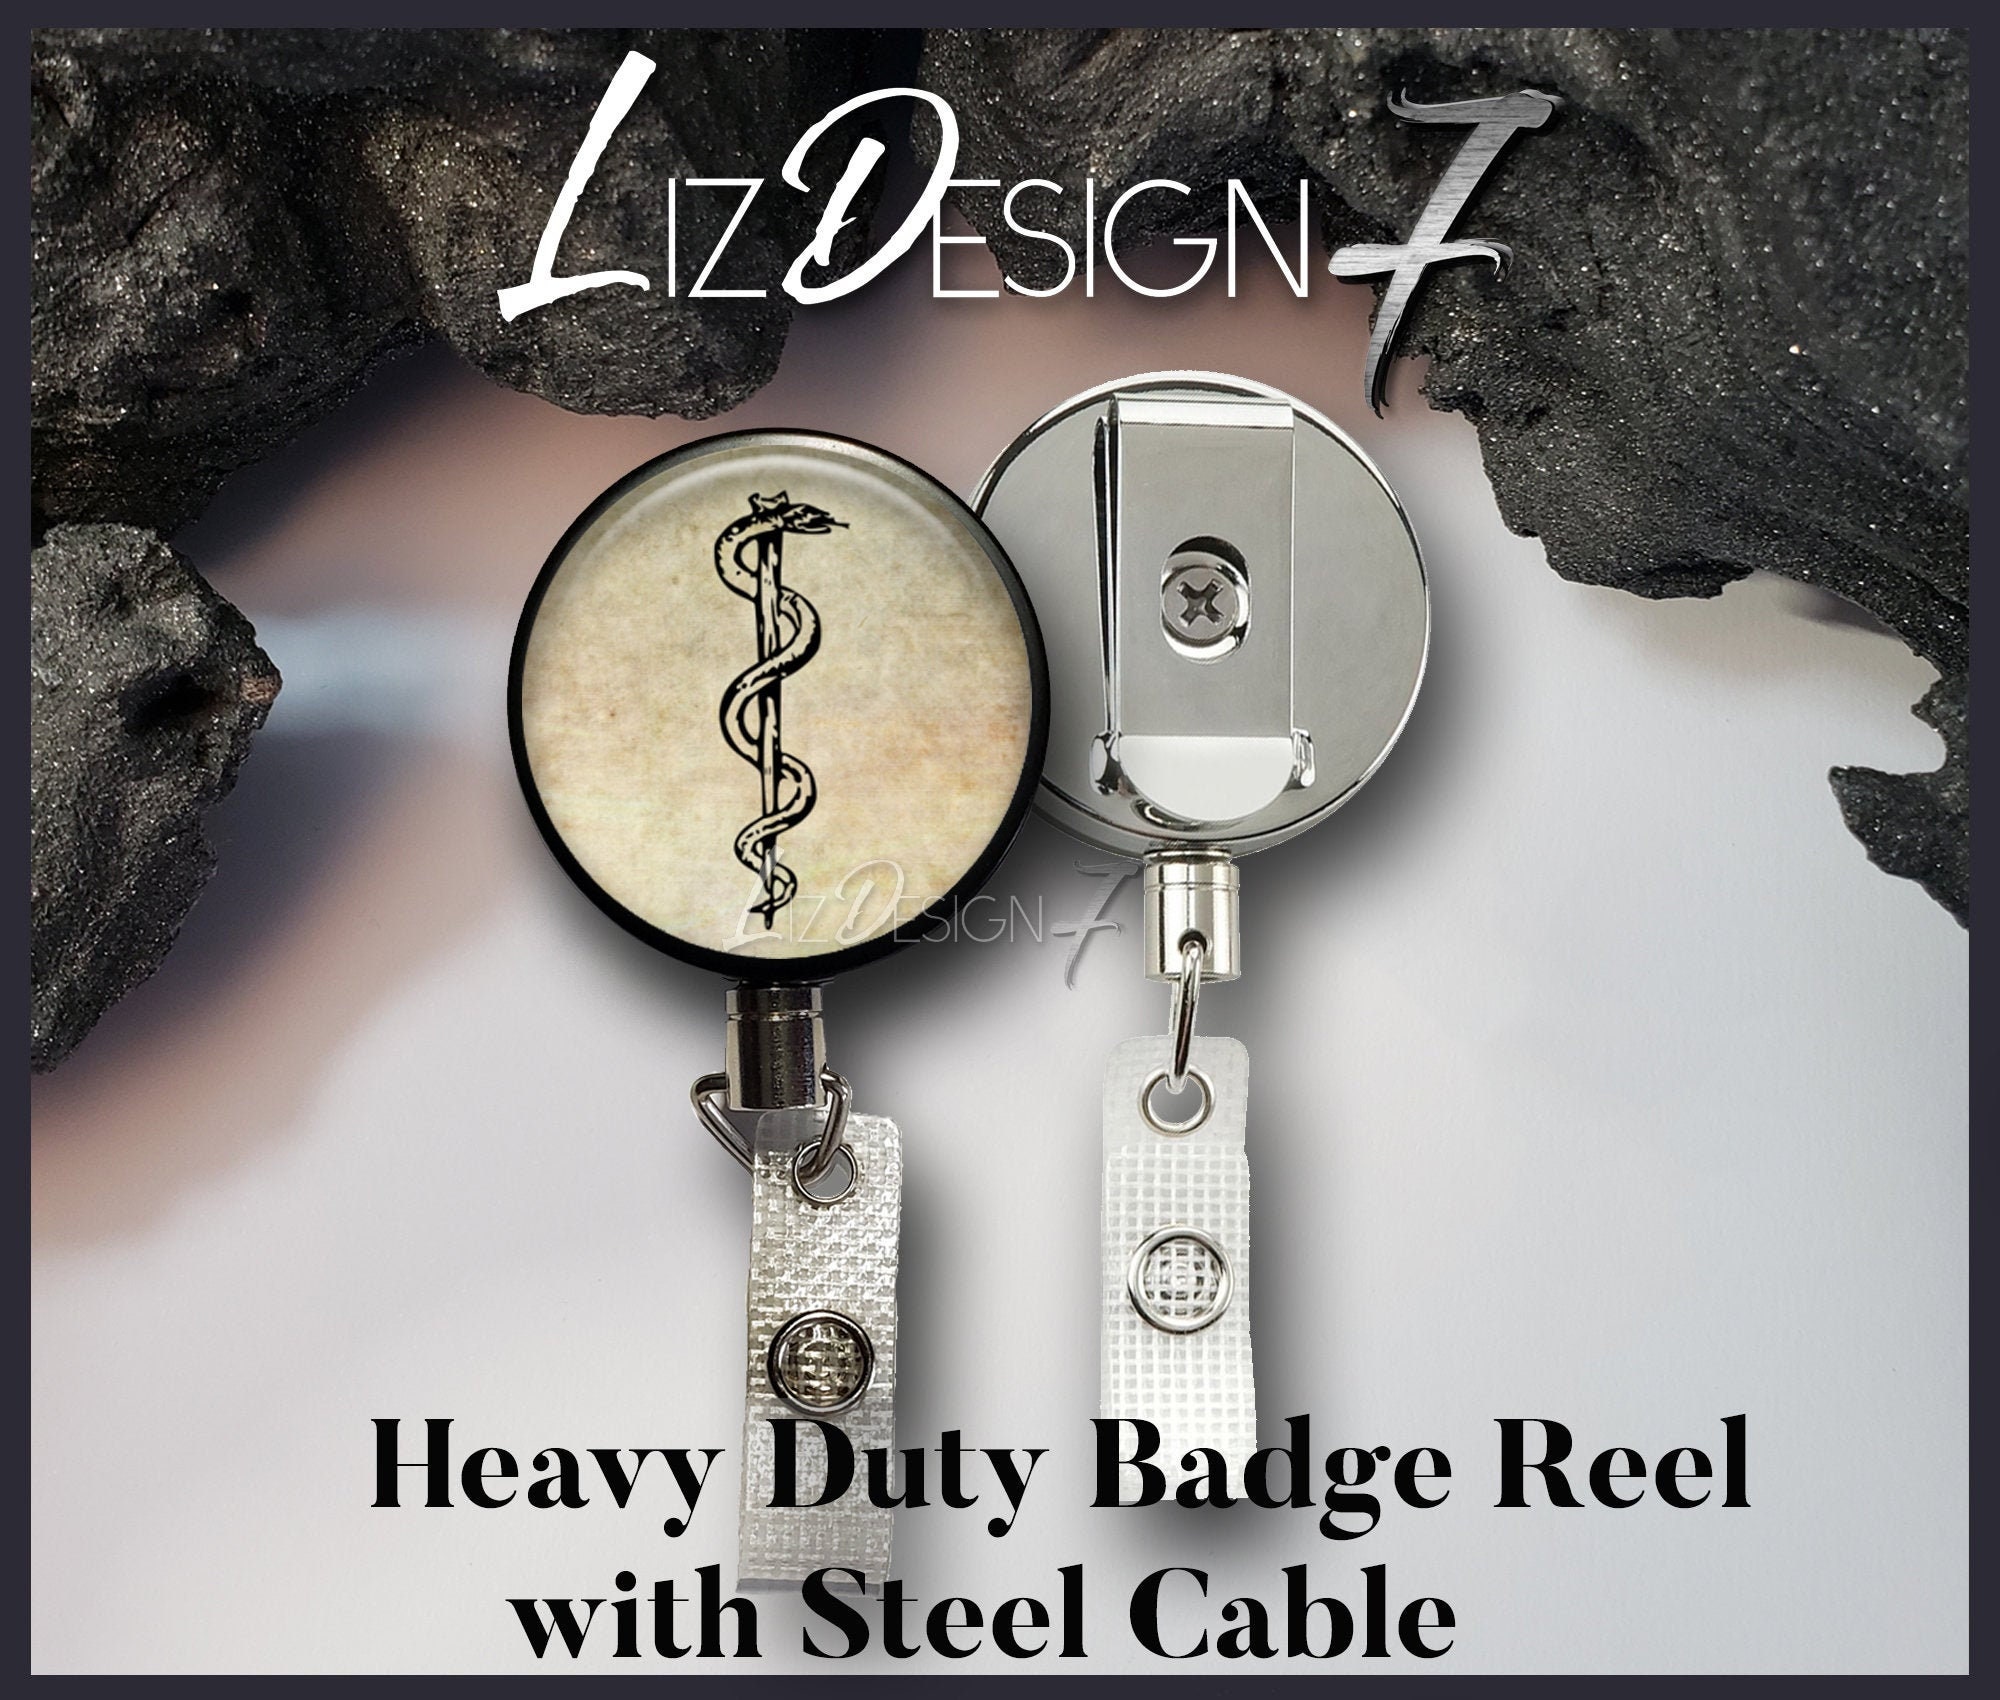 Rod of Asclepius Heavy Duty Badge Reel with Steel Cable - Medical Belt Clip Heavy Duty Badge Holder with Steel Cable - Slide Clip Badge Reel